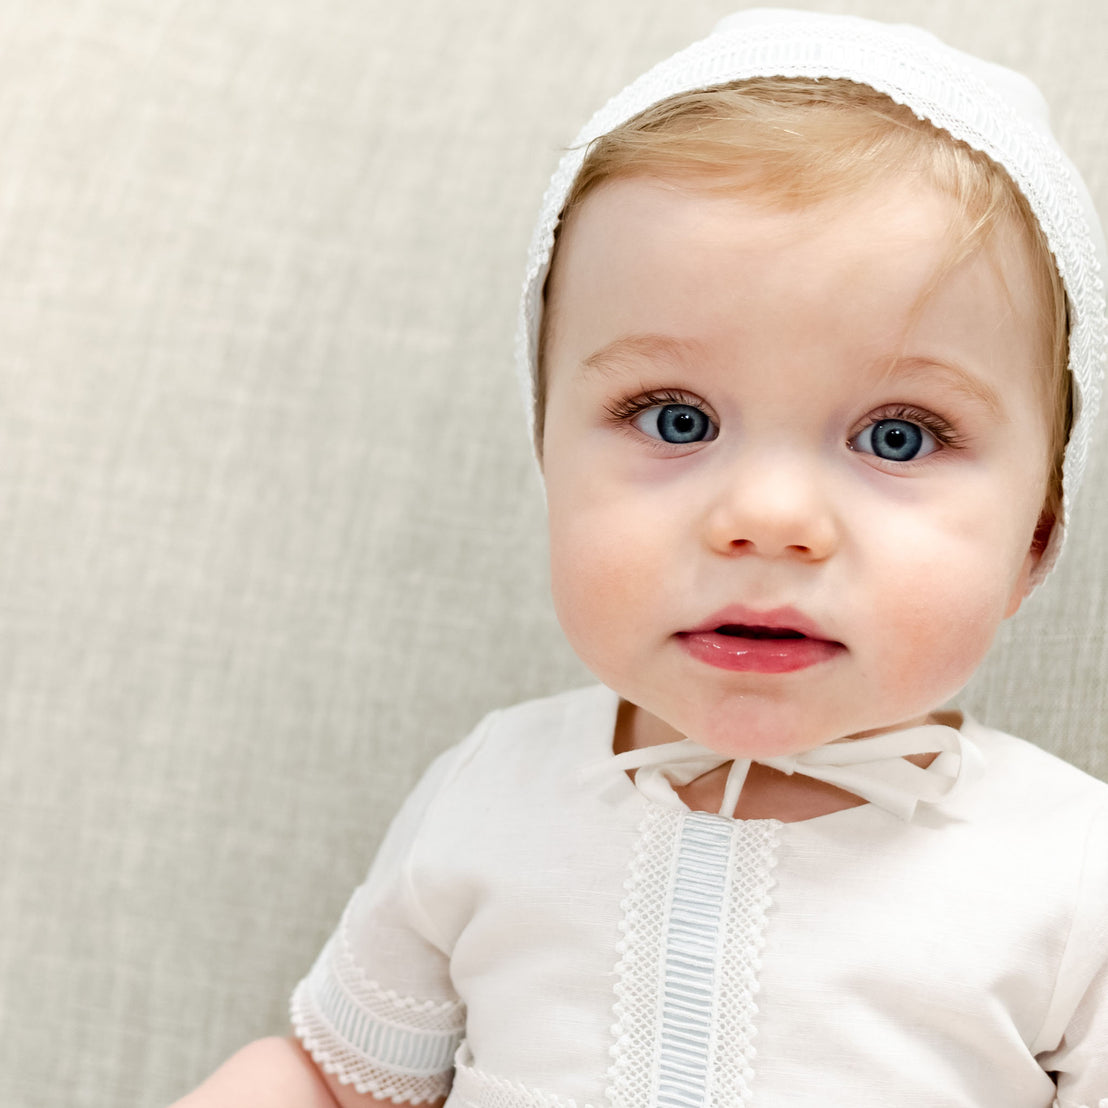 Baby boy looking into camera wearing a traditional boys bonnet.